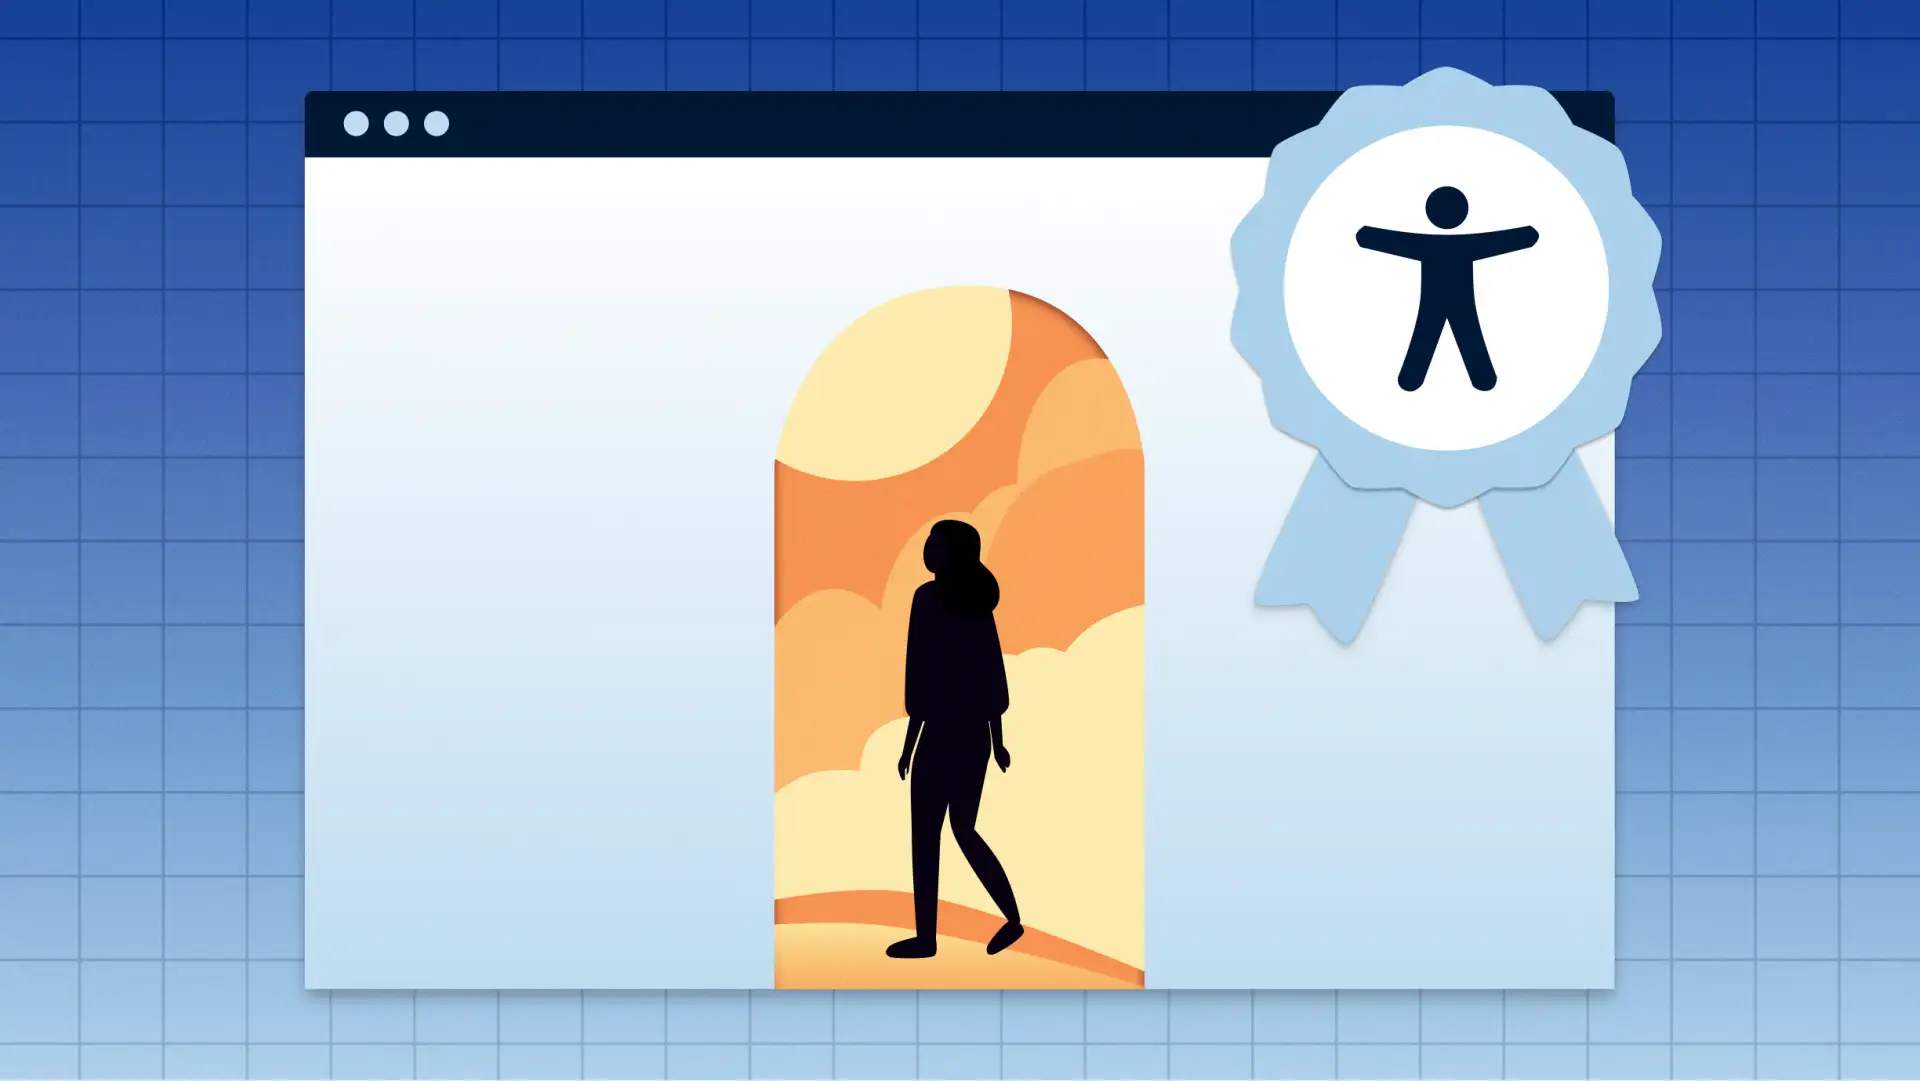 On a web page, a silhouetted person walks through a bright doorway, and a certification ribbon adorns the corner of the browser.